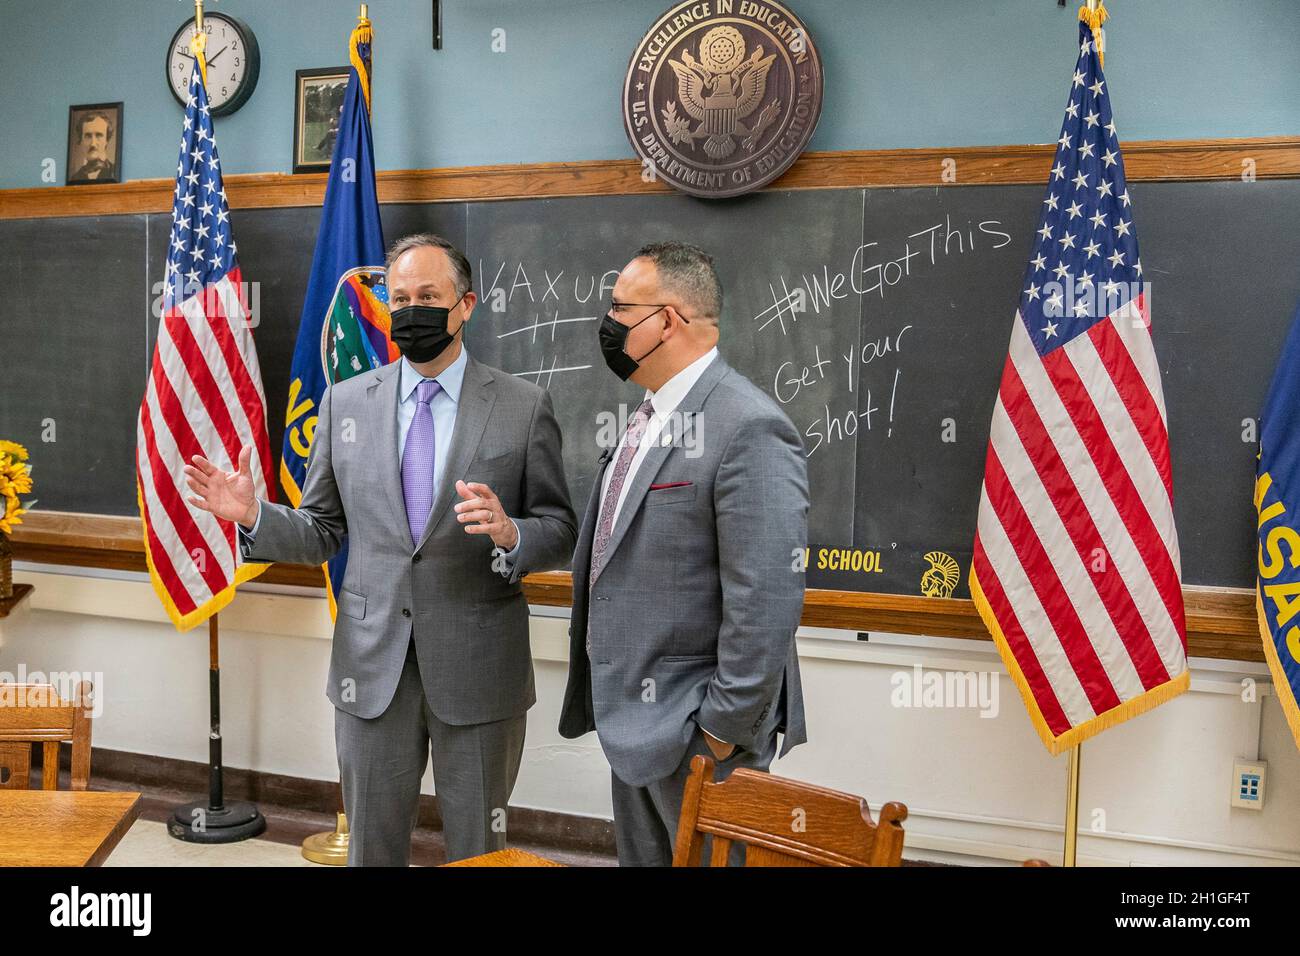 Topeka, United States of America. 09 August, 2021. U.S Second Gentleman Douglas Emhoff, left, and Education Secretary Miguel Cardona record a message about vaccines in a classroom at Topeka High School August 9, 2021 in Topeka, Kansas.  Credit: Katie Ricks/White House Photo/Alamy Live News Stock Photo